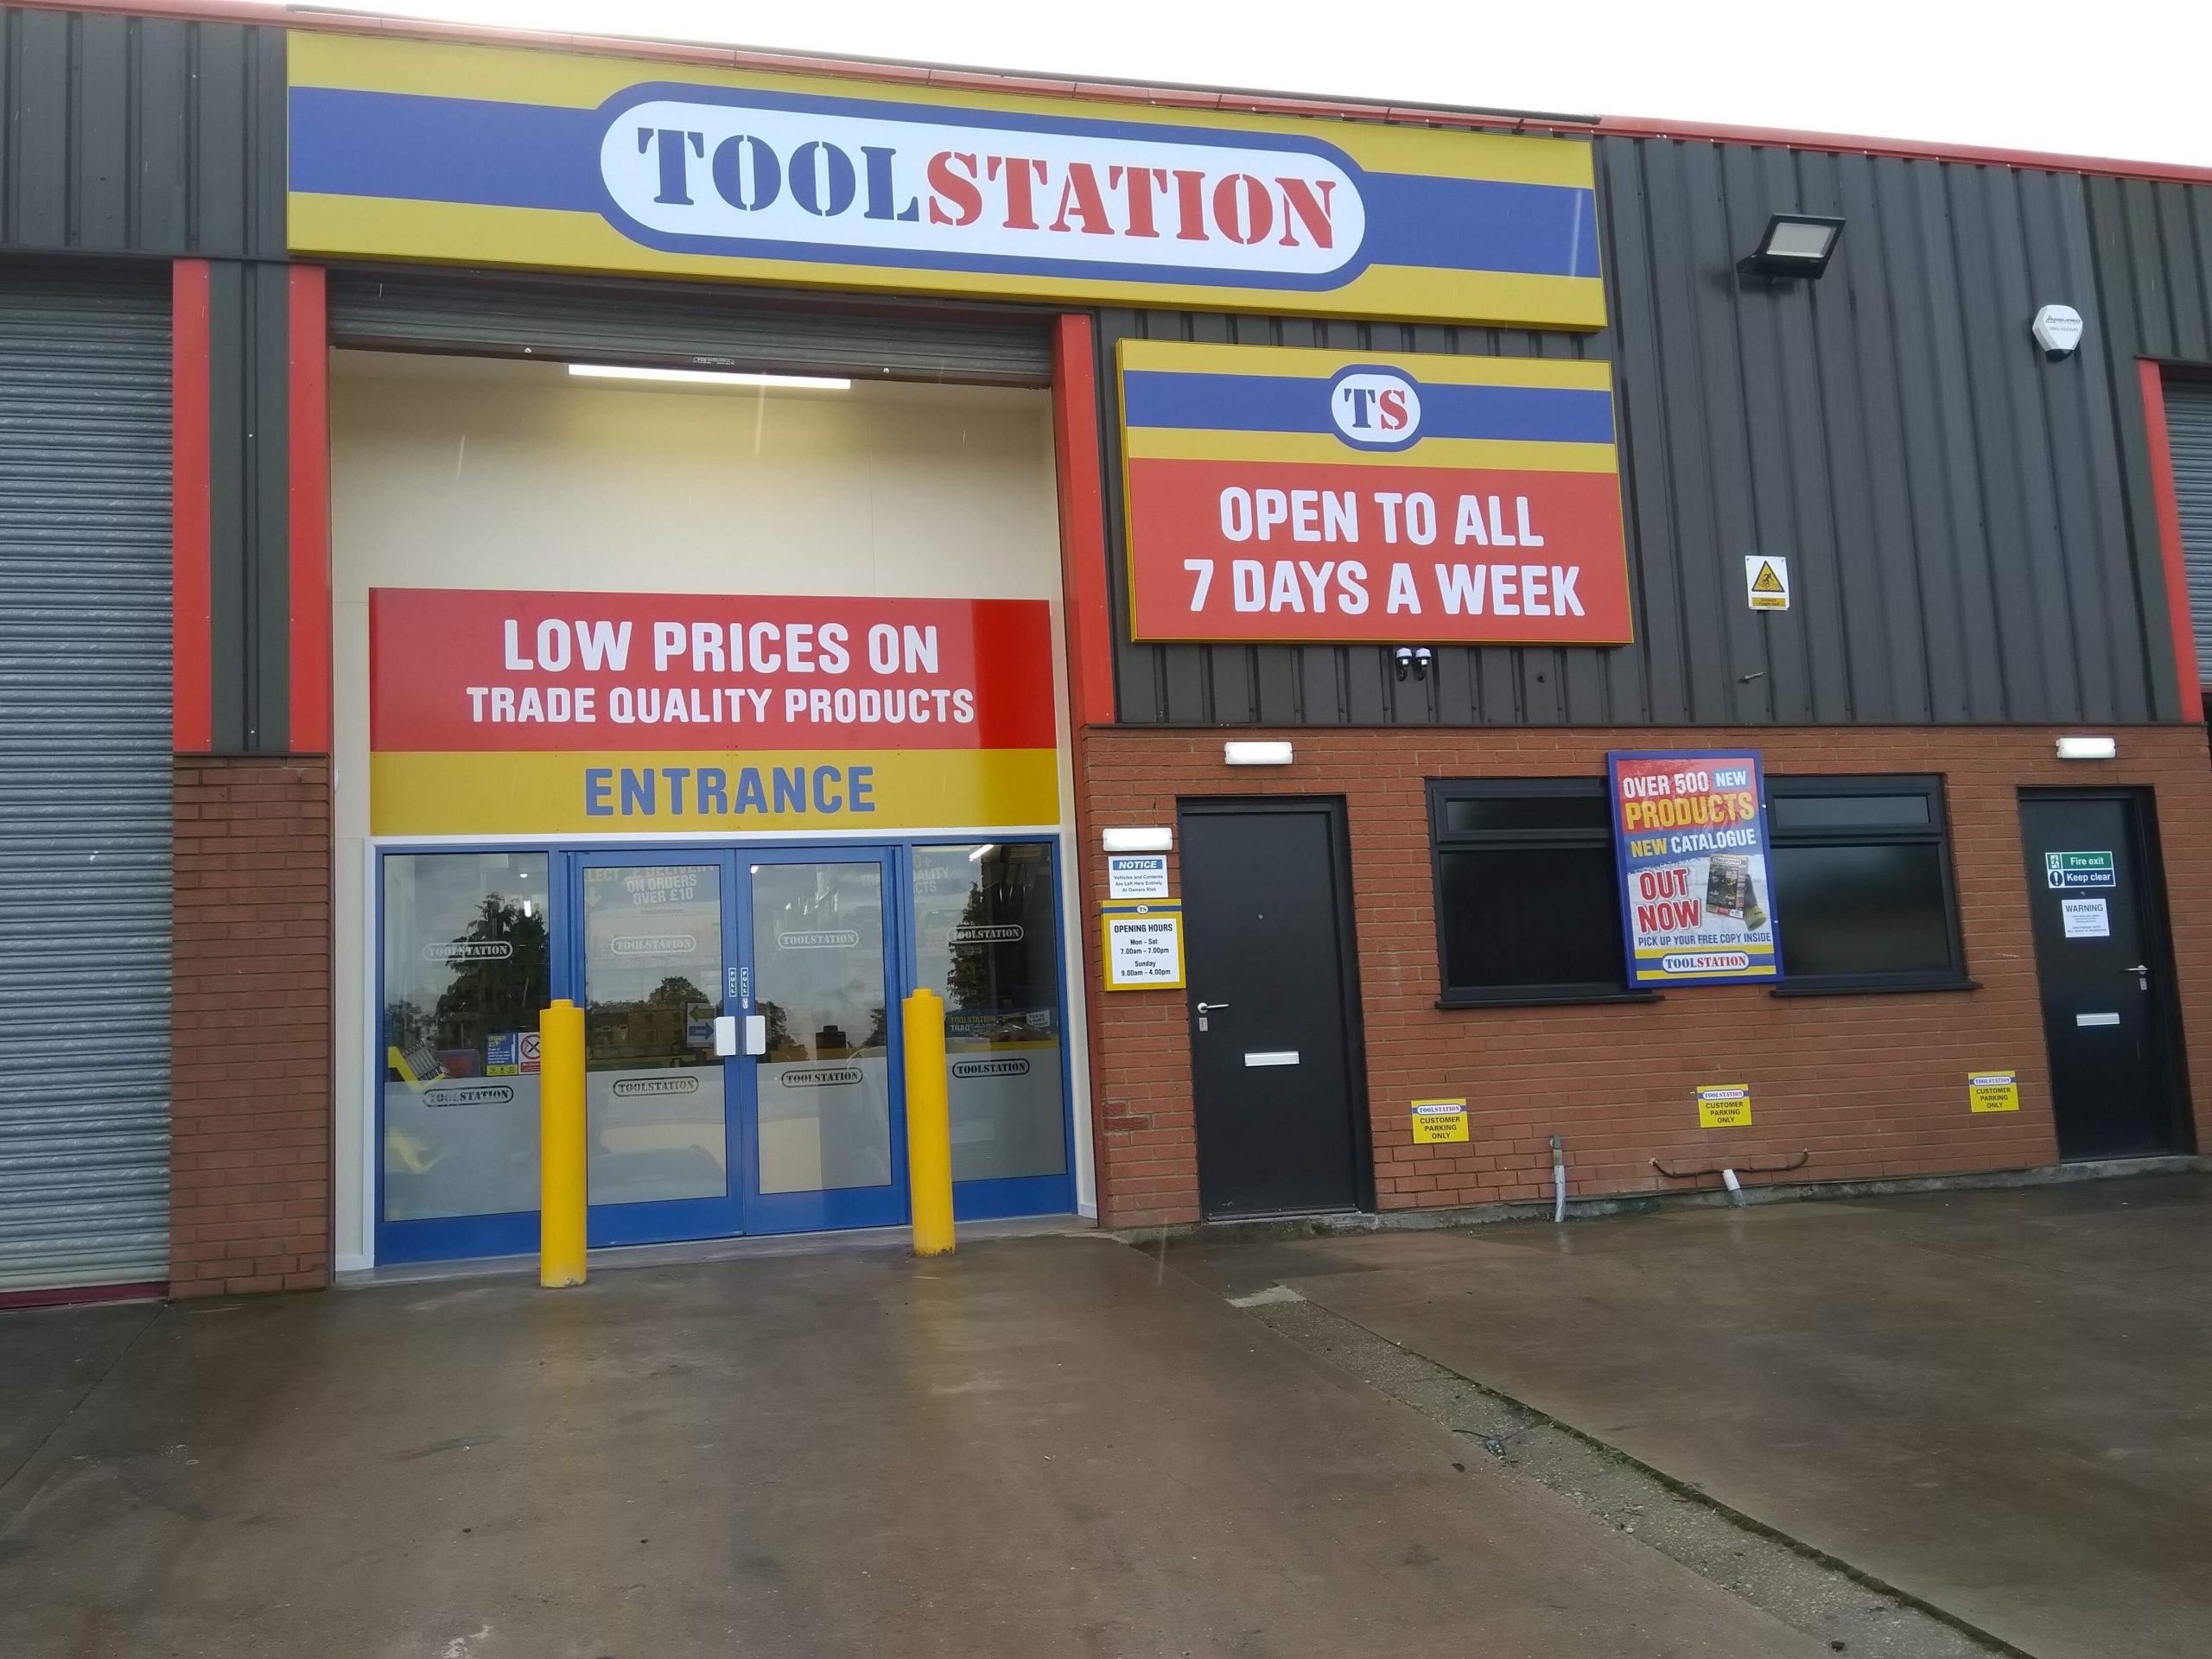 Toolstation Pontefract Is Now Open for dimensions 4608 X 3456